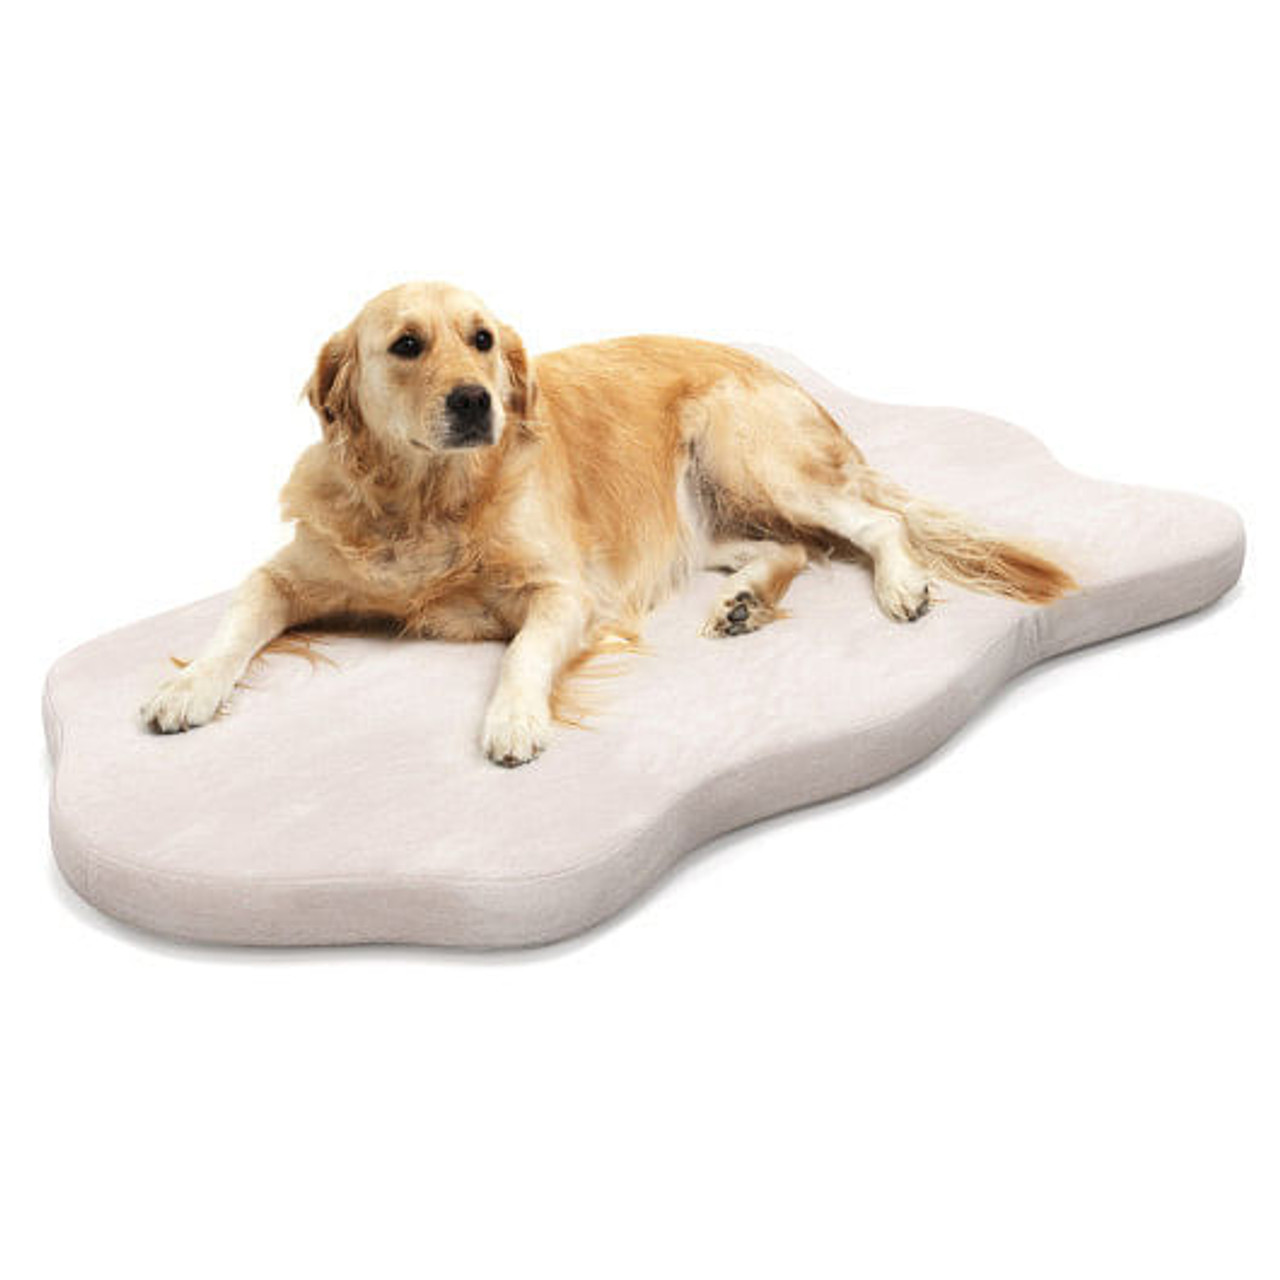 Orthopedic Dog Bed with Memory Foam Support for Large Dogs-Gray